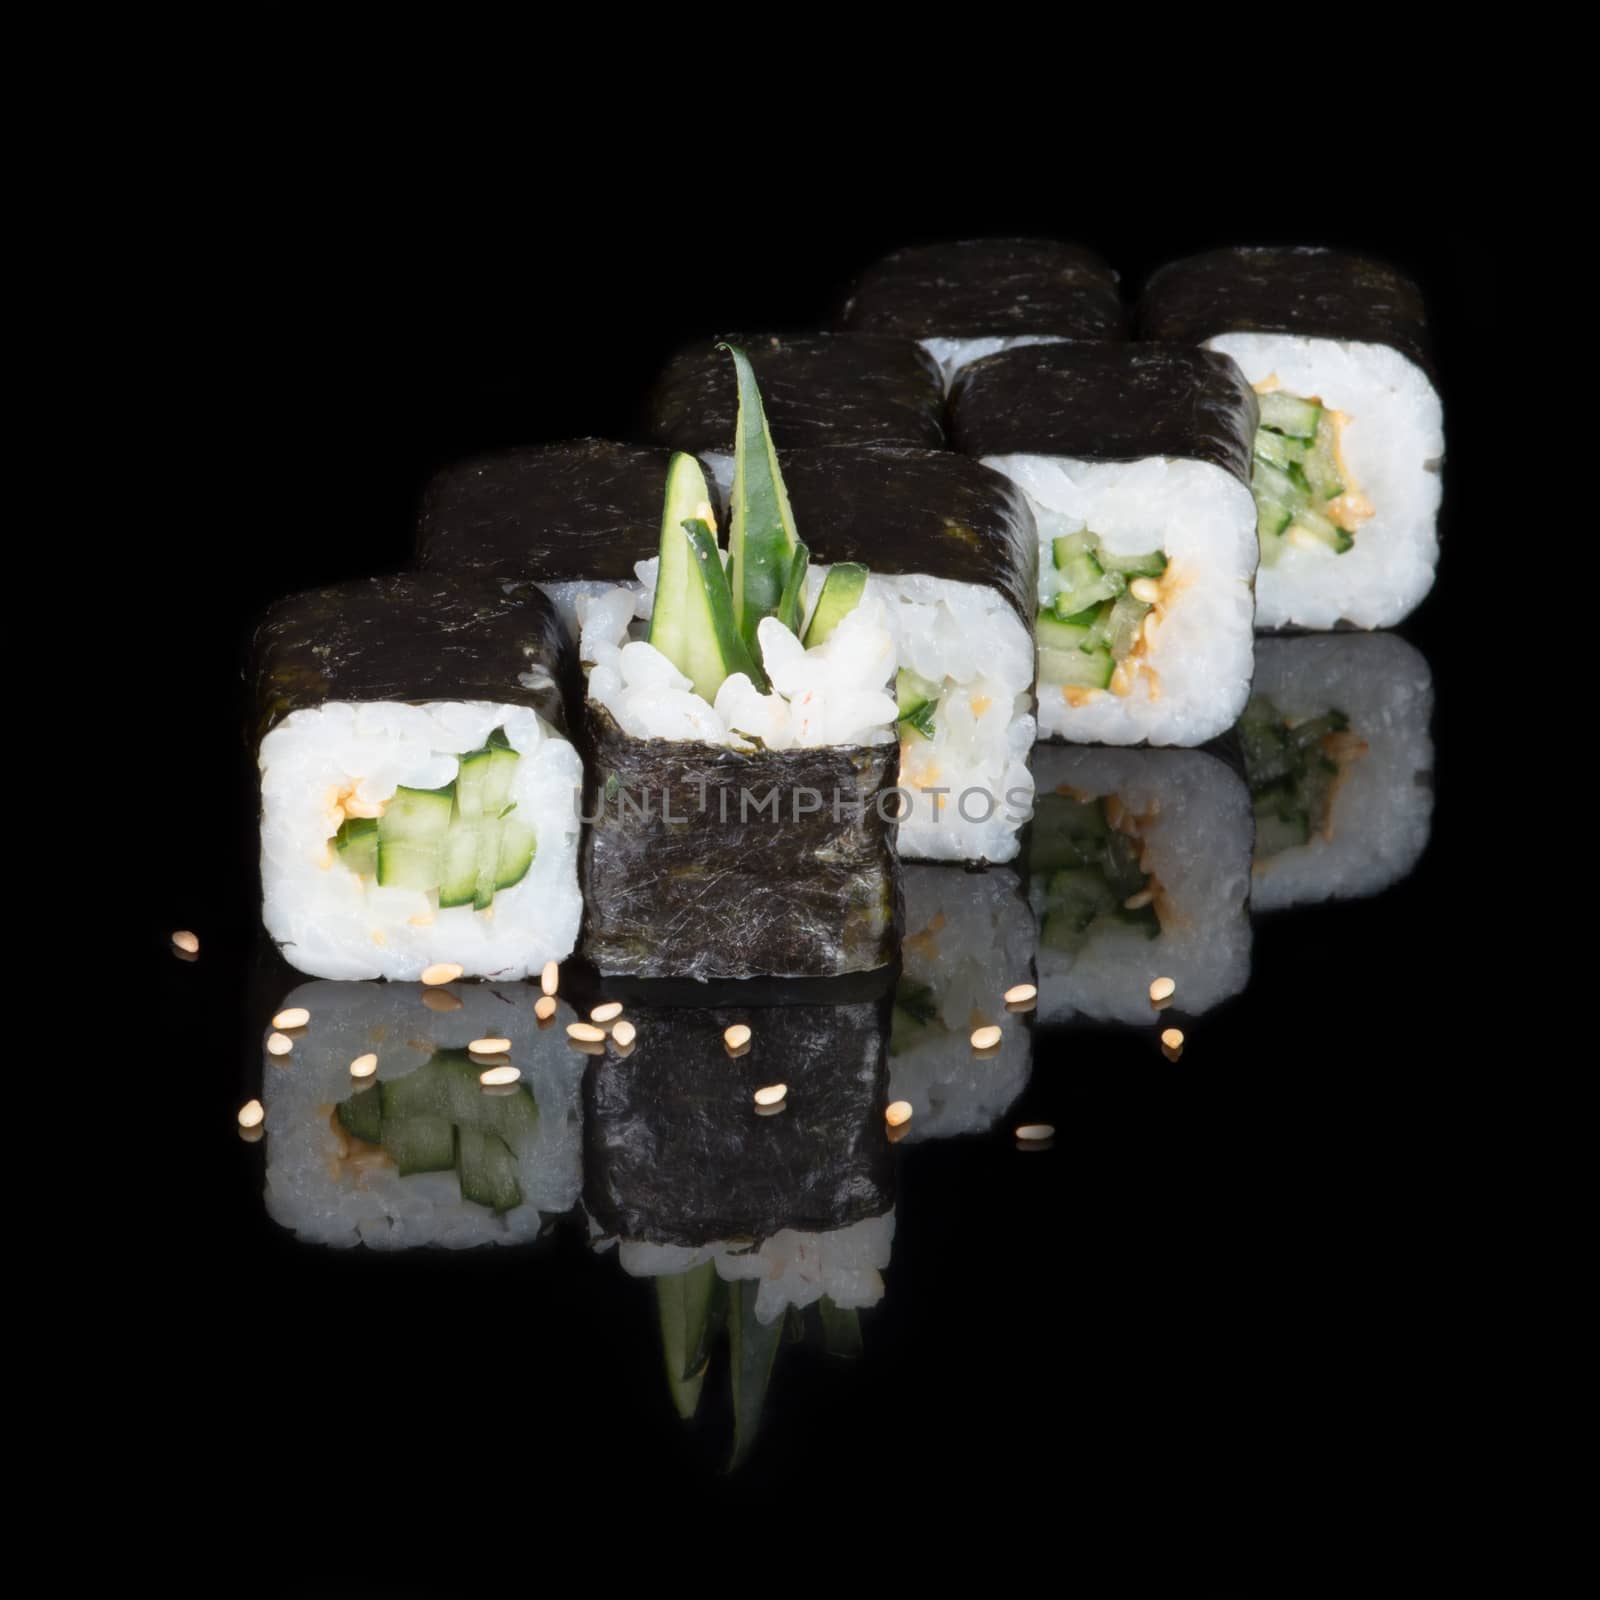 Sushi rolls with cucumber by kzen